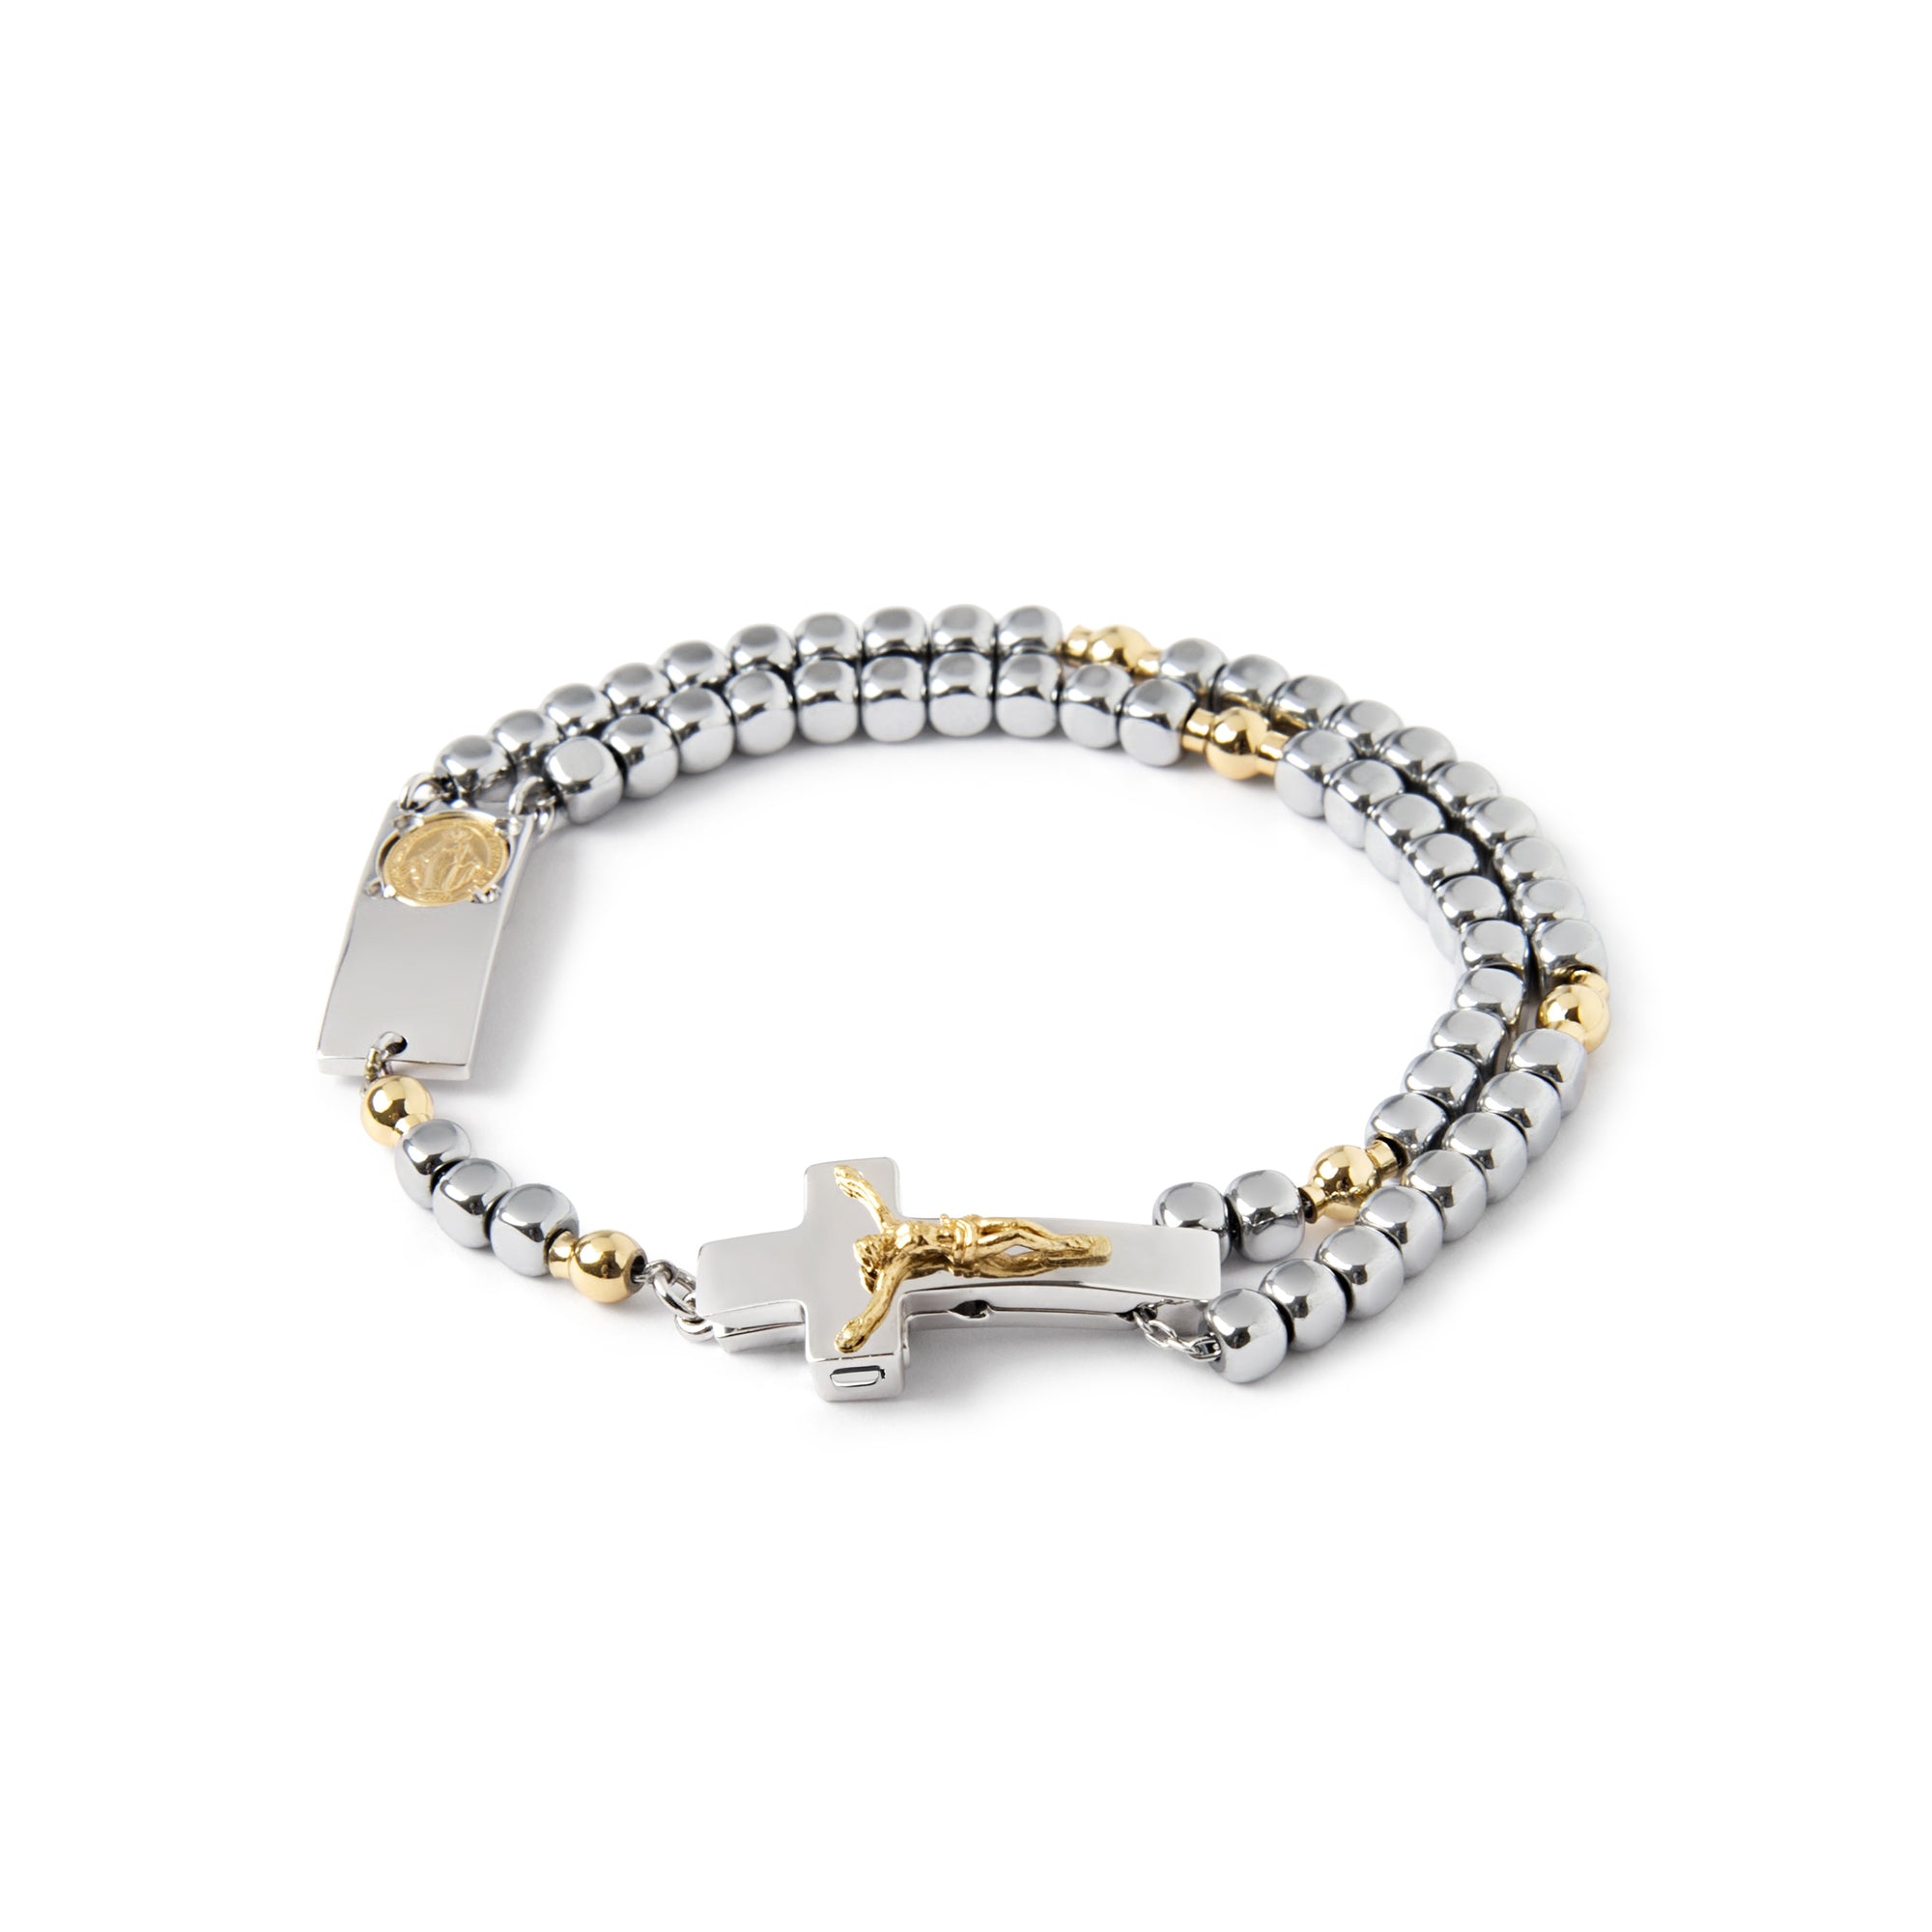 ROSALET® PERLE QUADRATE IN EMATITE D'ARGENTO, PATER IN ARGENTO STERLING PLACCATI IN ORO, TRADIZIONALE   